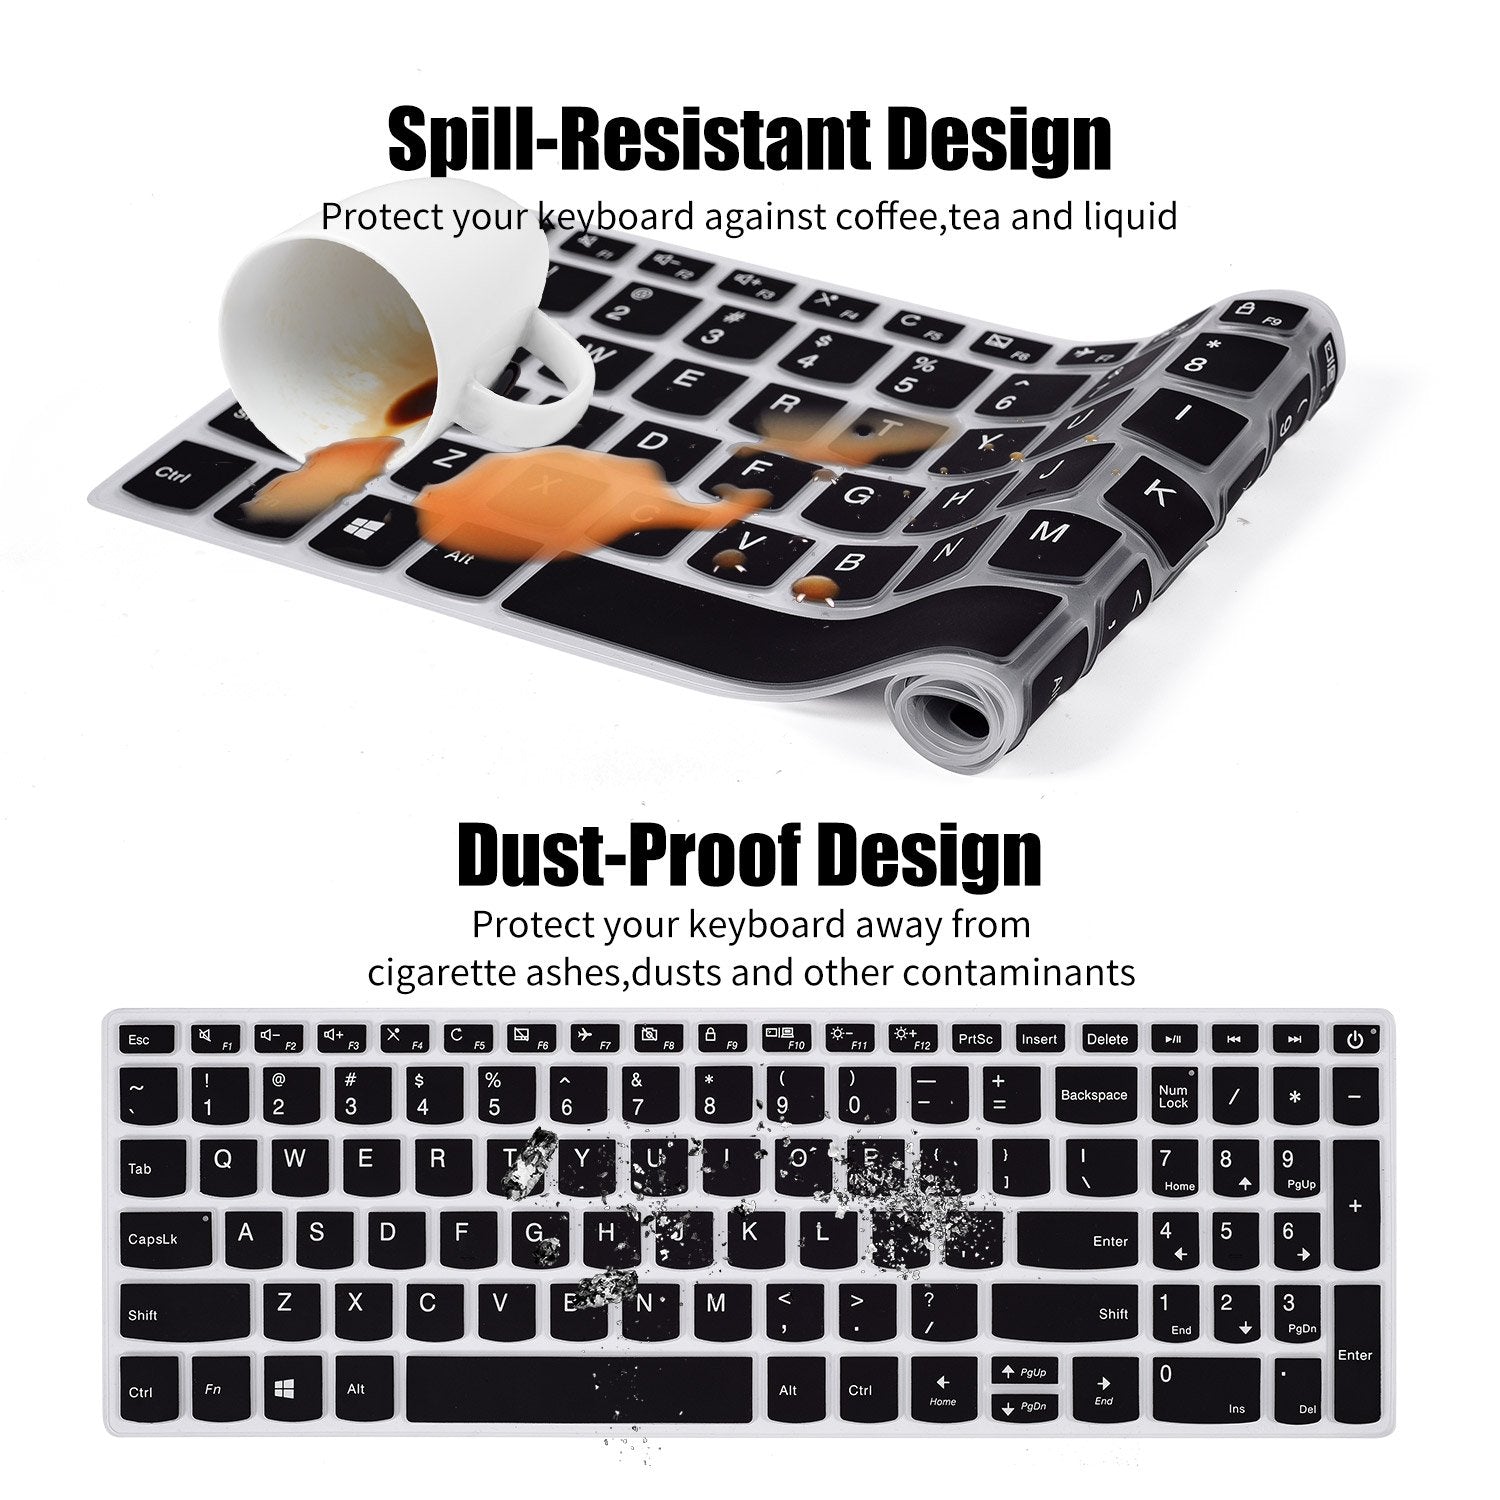 Silicone Keyboard Skin Cover for Lenovo Ideapad 15.6 Inch 130 S145 320 330 330S L340 520 17.3 Inch 320 330 Laptop (Black)